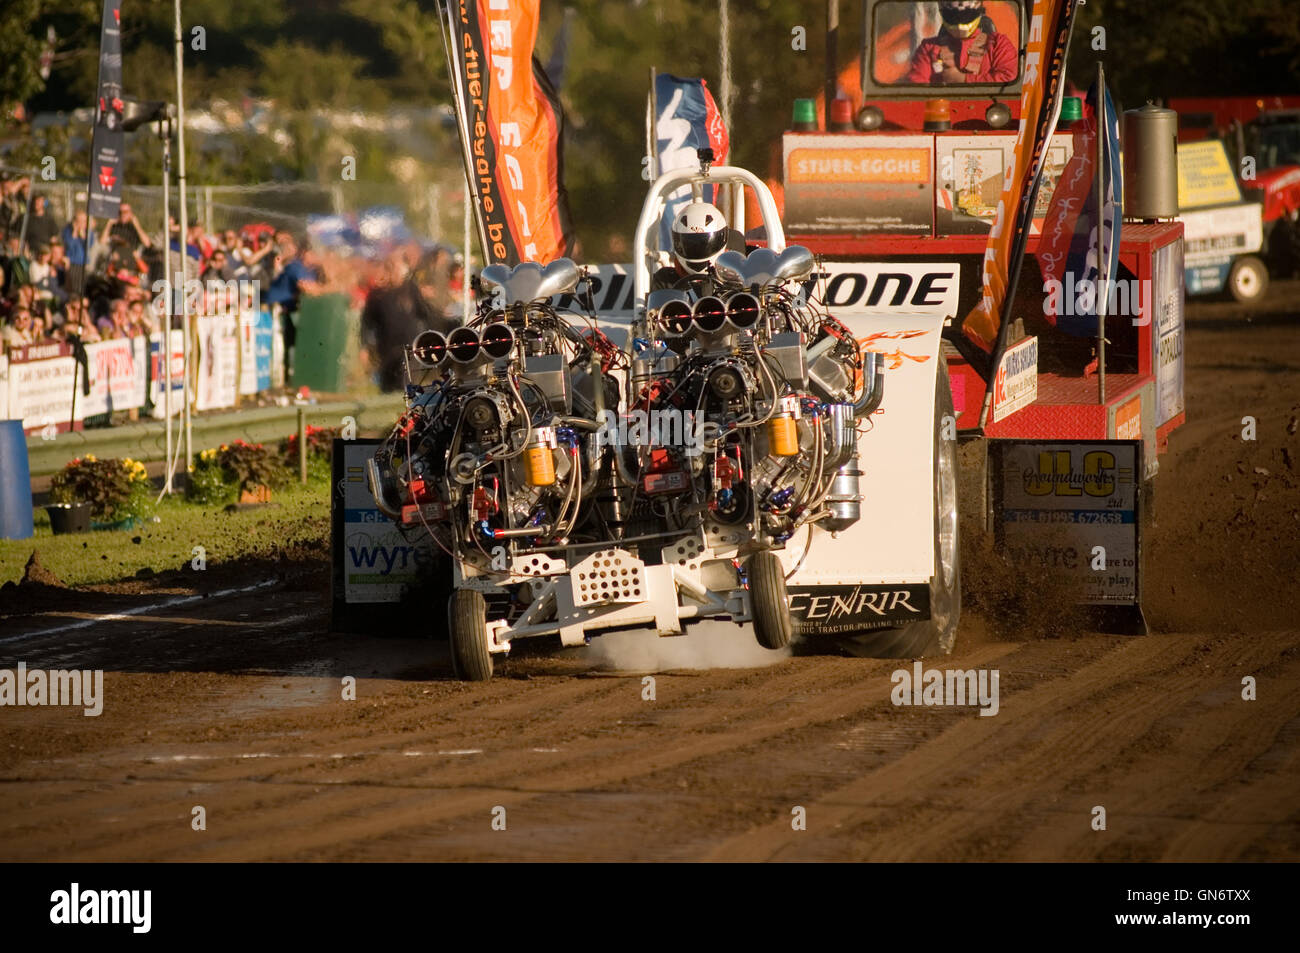 danish tractor pulling team competing with 4 V8 supercharged engines Stock Photo